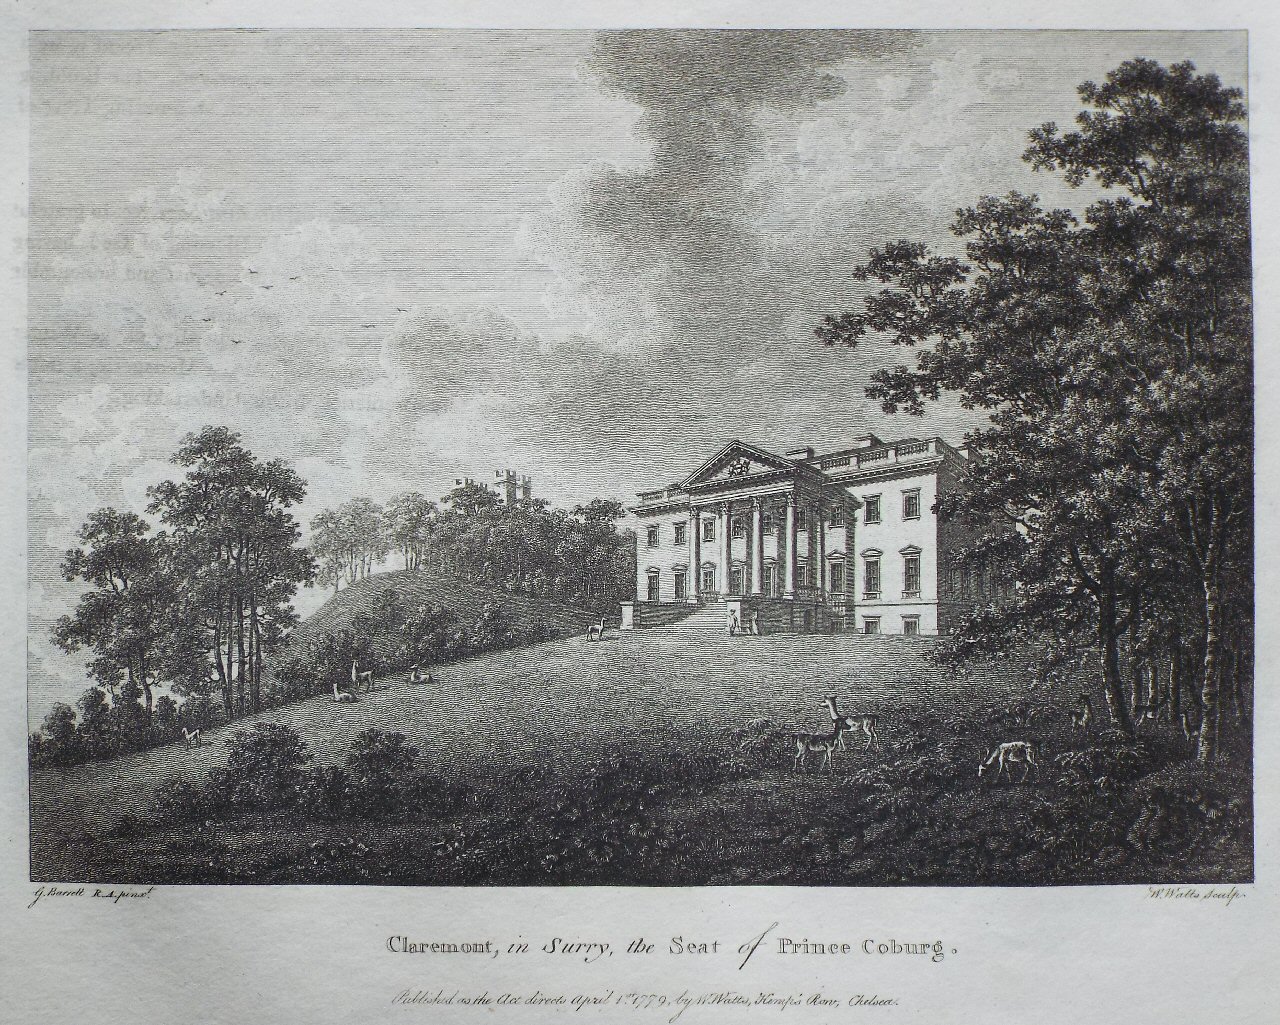 Print - Claremont, in Surry, the Seat of Prince Coburg - Watts